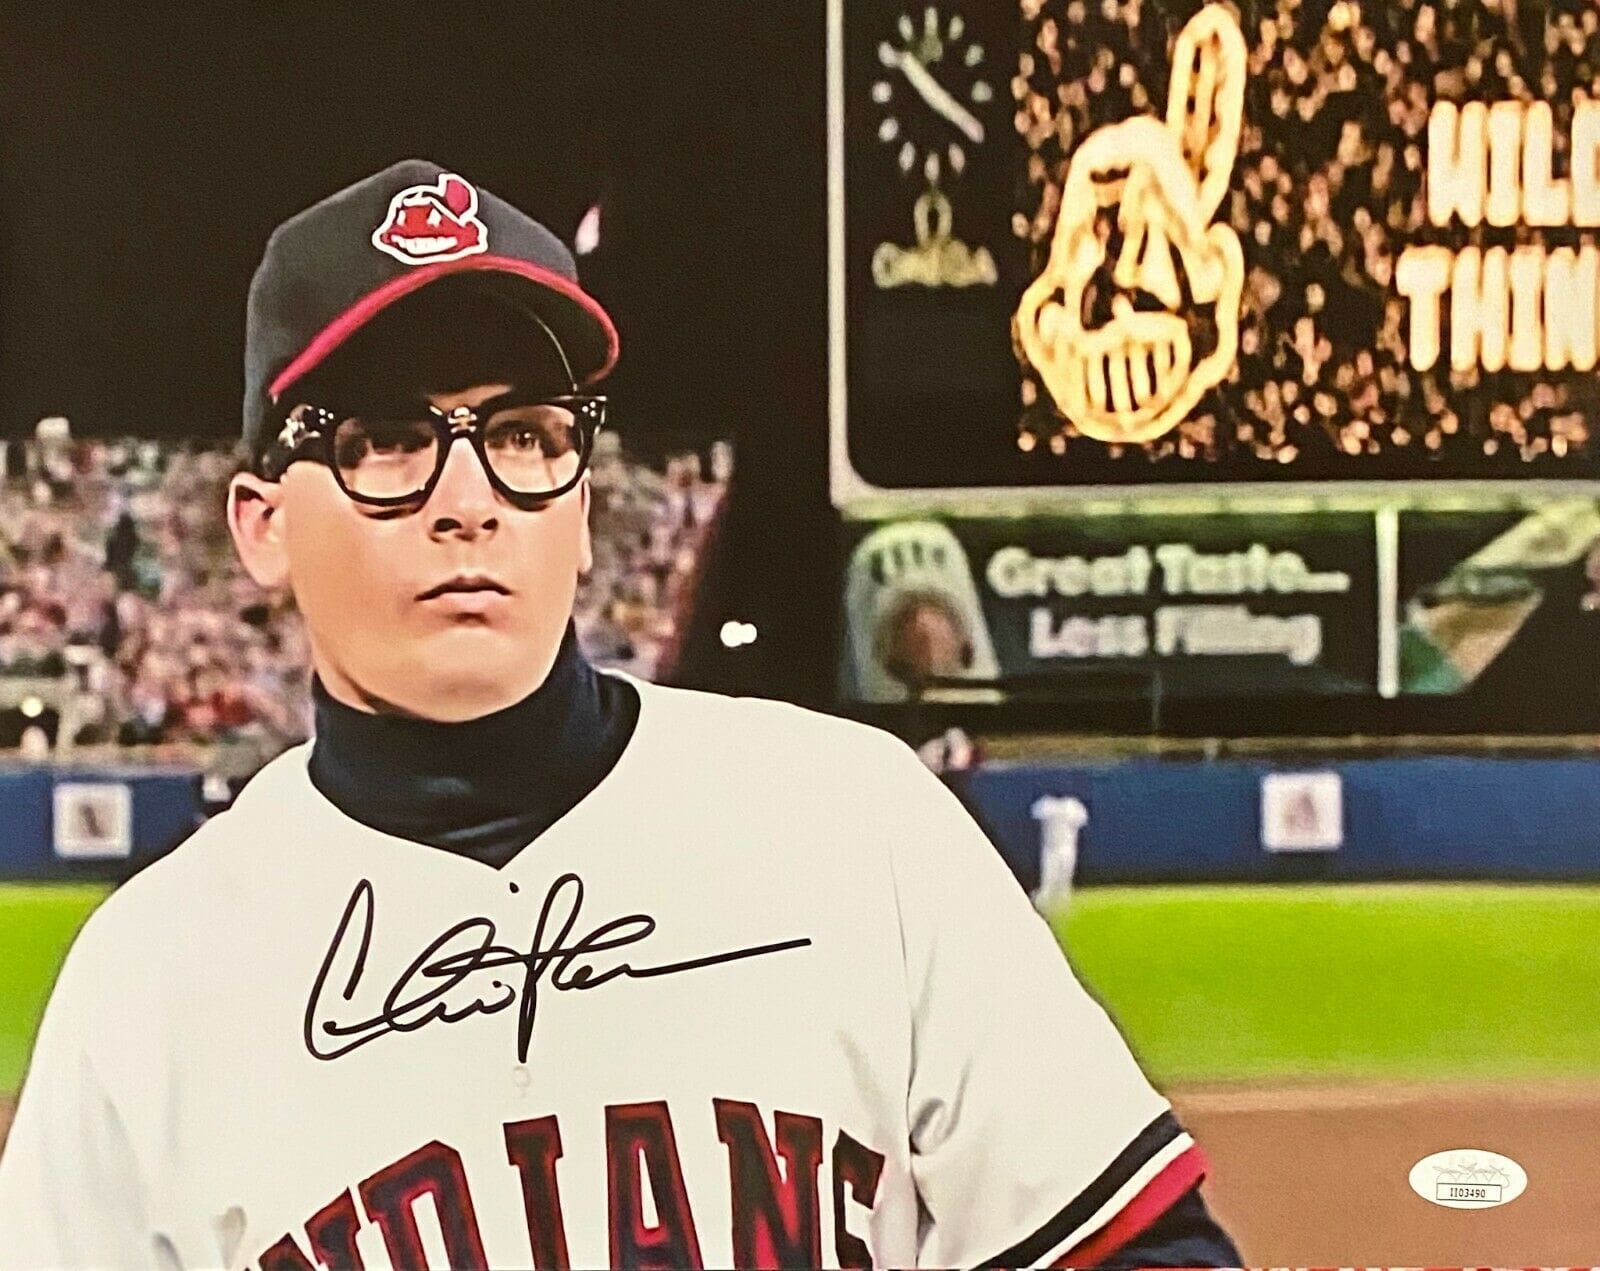 Charlie Sheen Signed Autographed Photo 11x14 JSA Major League Wild Thing 6